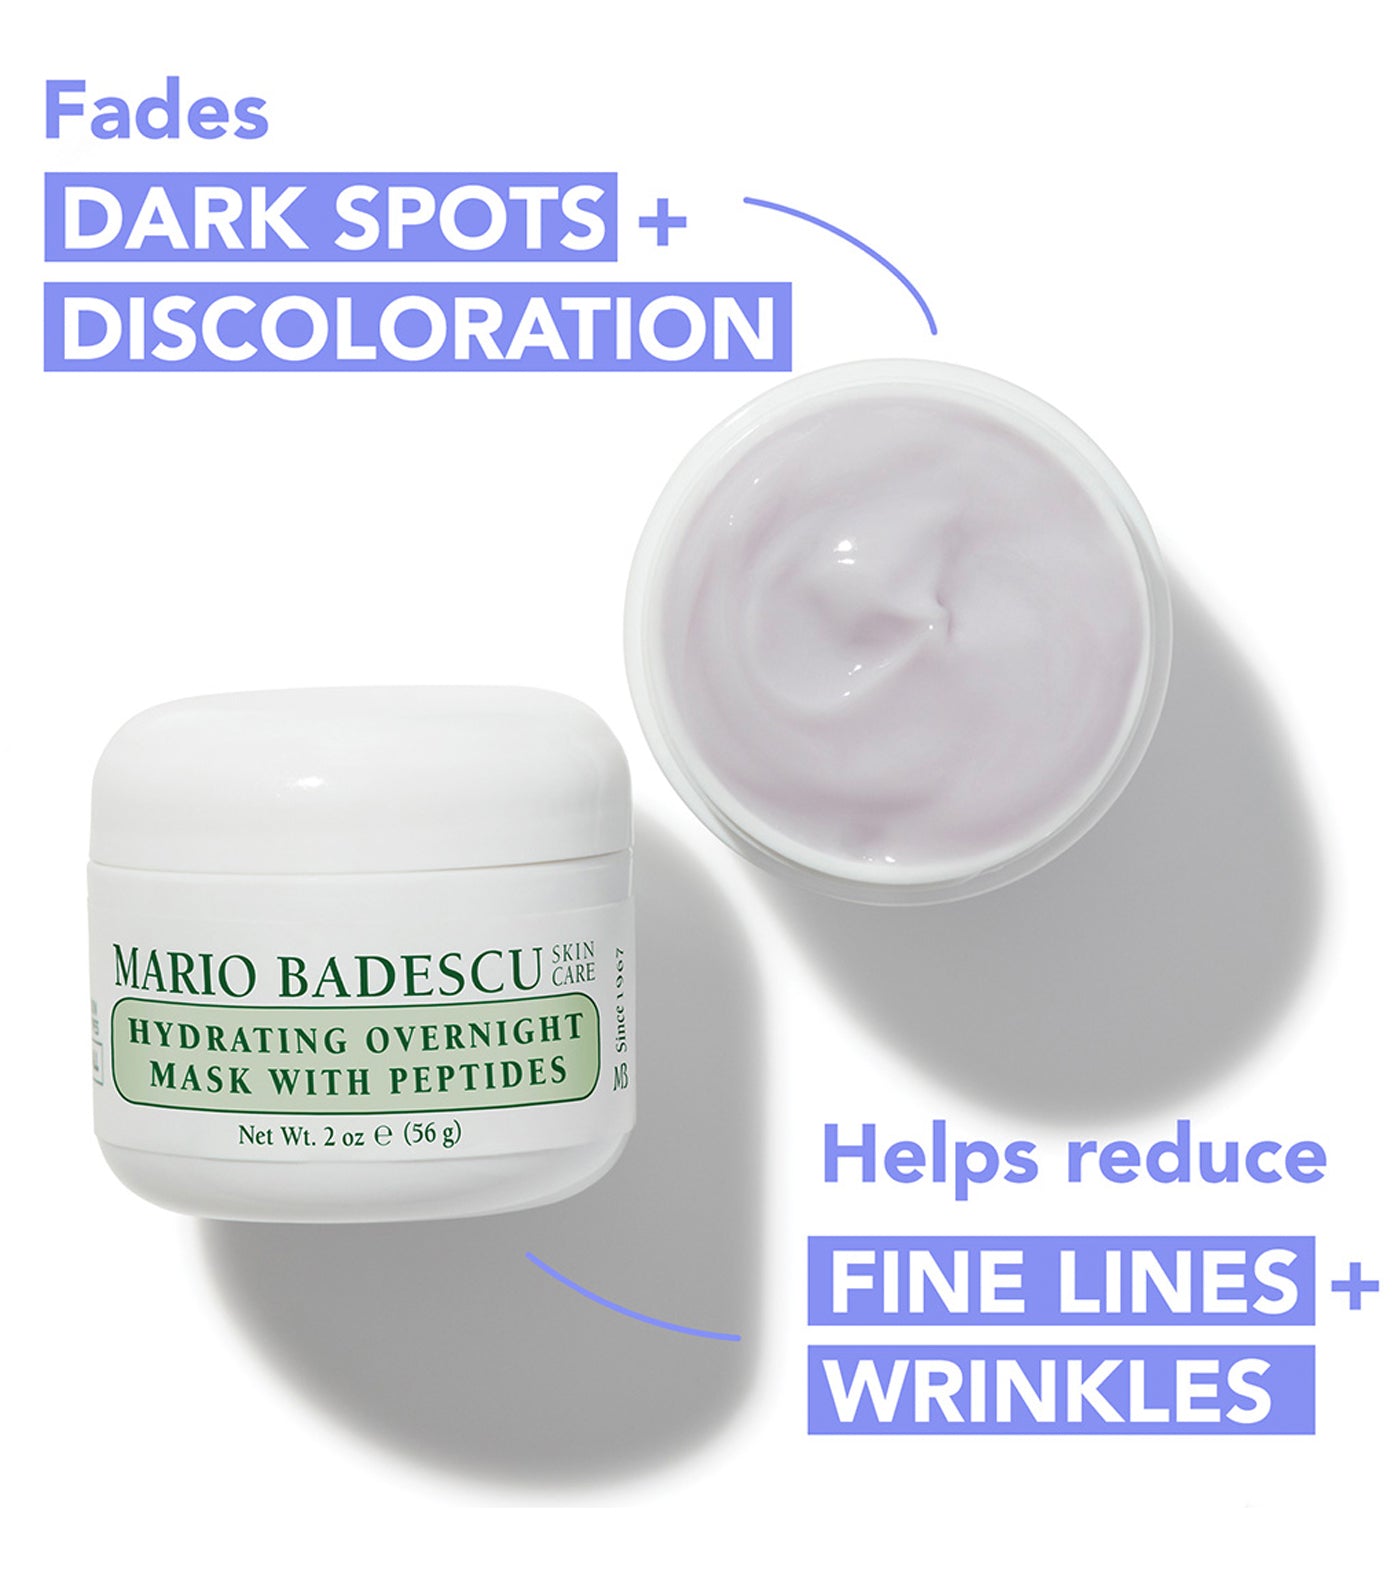 Hydrating Overnight Mask with Peptides